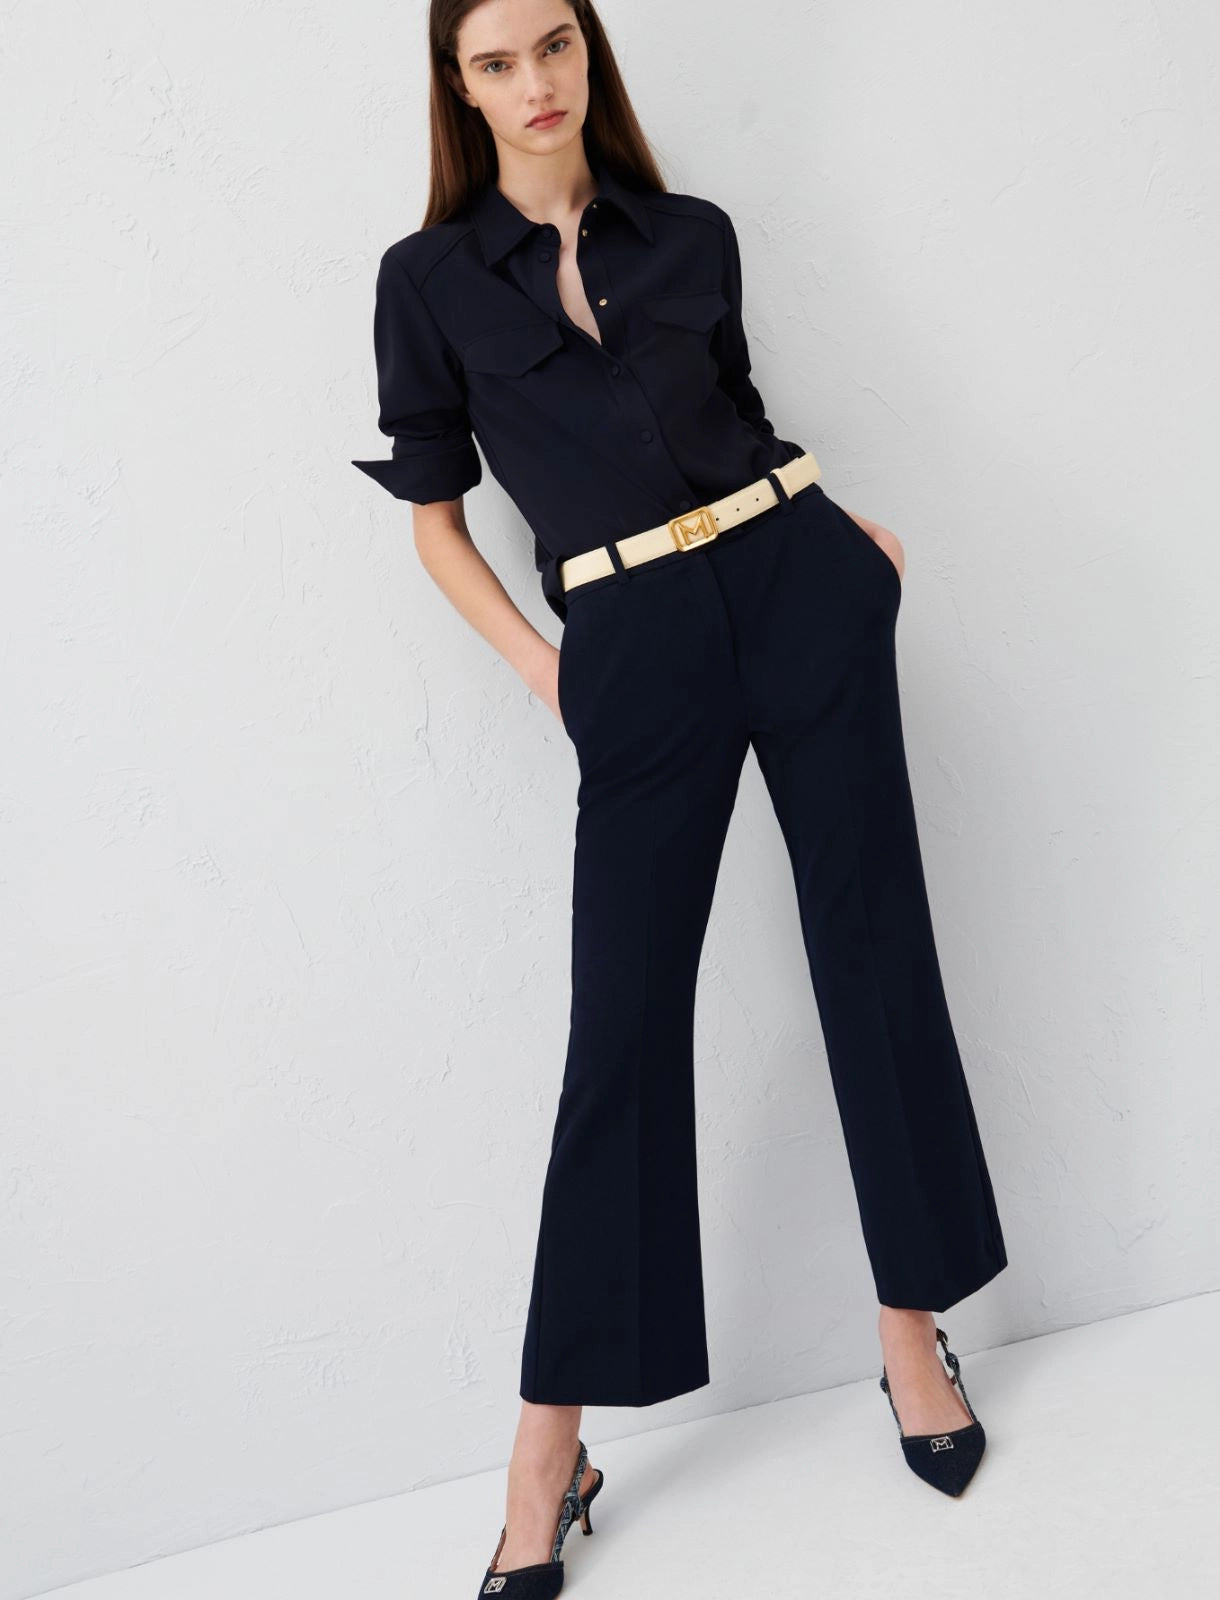 Bootcut trousers – Mila Βoutique